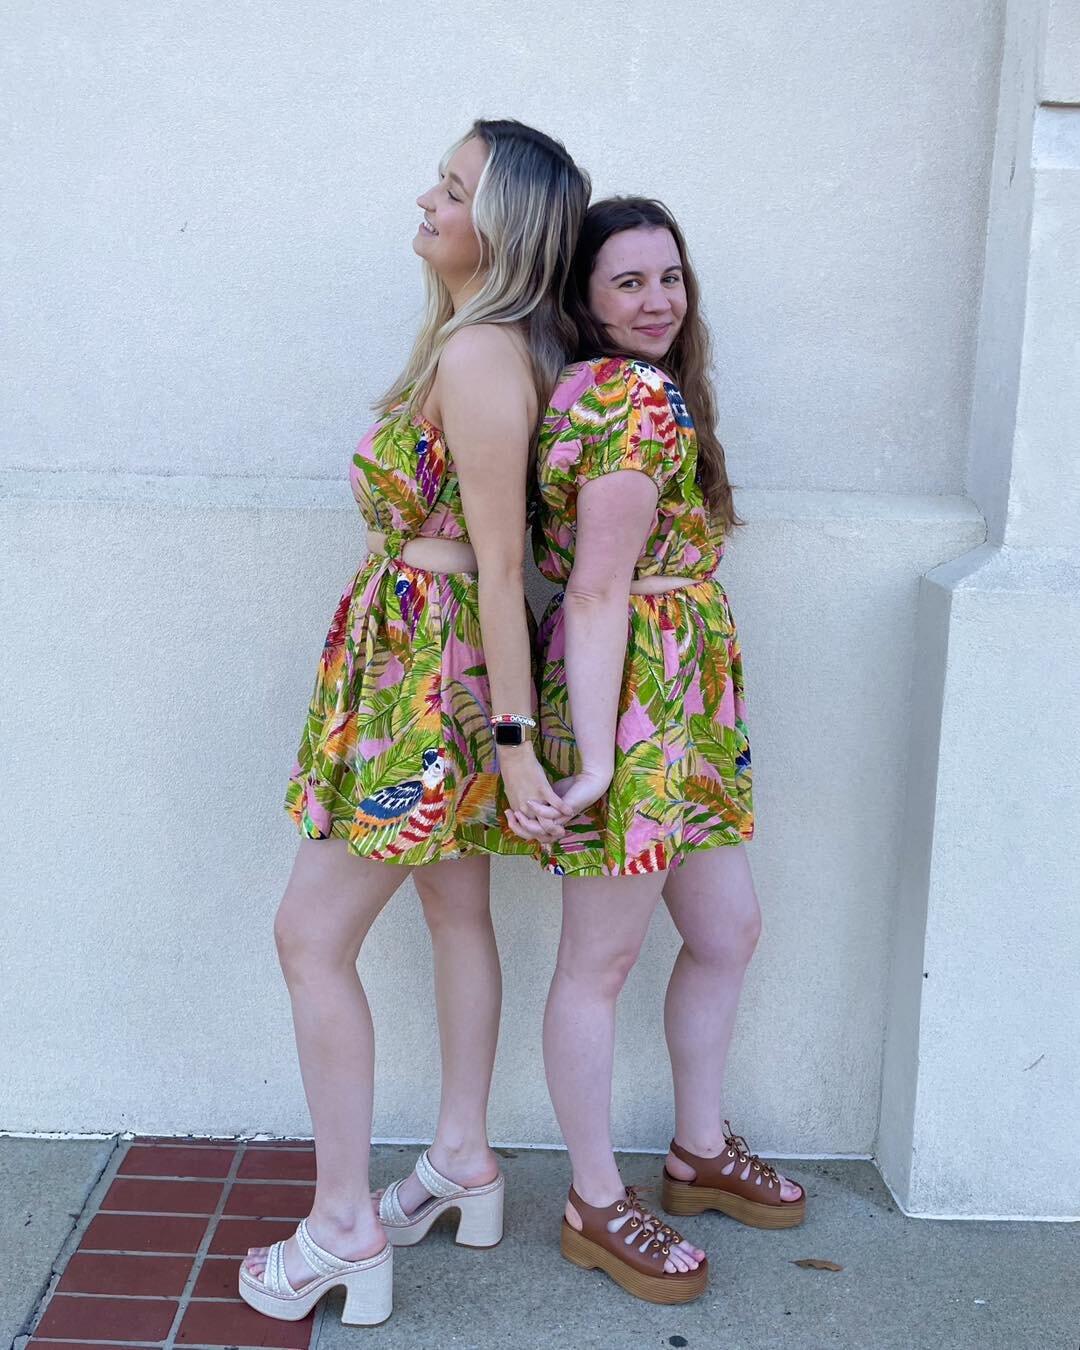 Double trouble 👯&zwj;♀️ Tag your bestie you&rsquo;d twin with 🫶🏼
&bull;
&bull;
&bull;
#moderaleigh #consignmentboutique #designerresale #thrifted #trending #raleighnc #shoplocalraleigh #shopsmall #womenownedbusiness #luxurylovers #designer #luxury